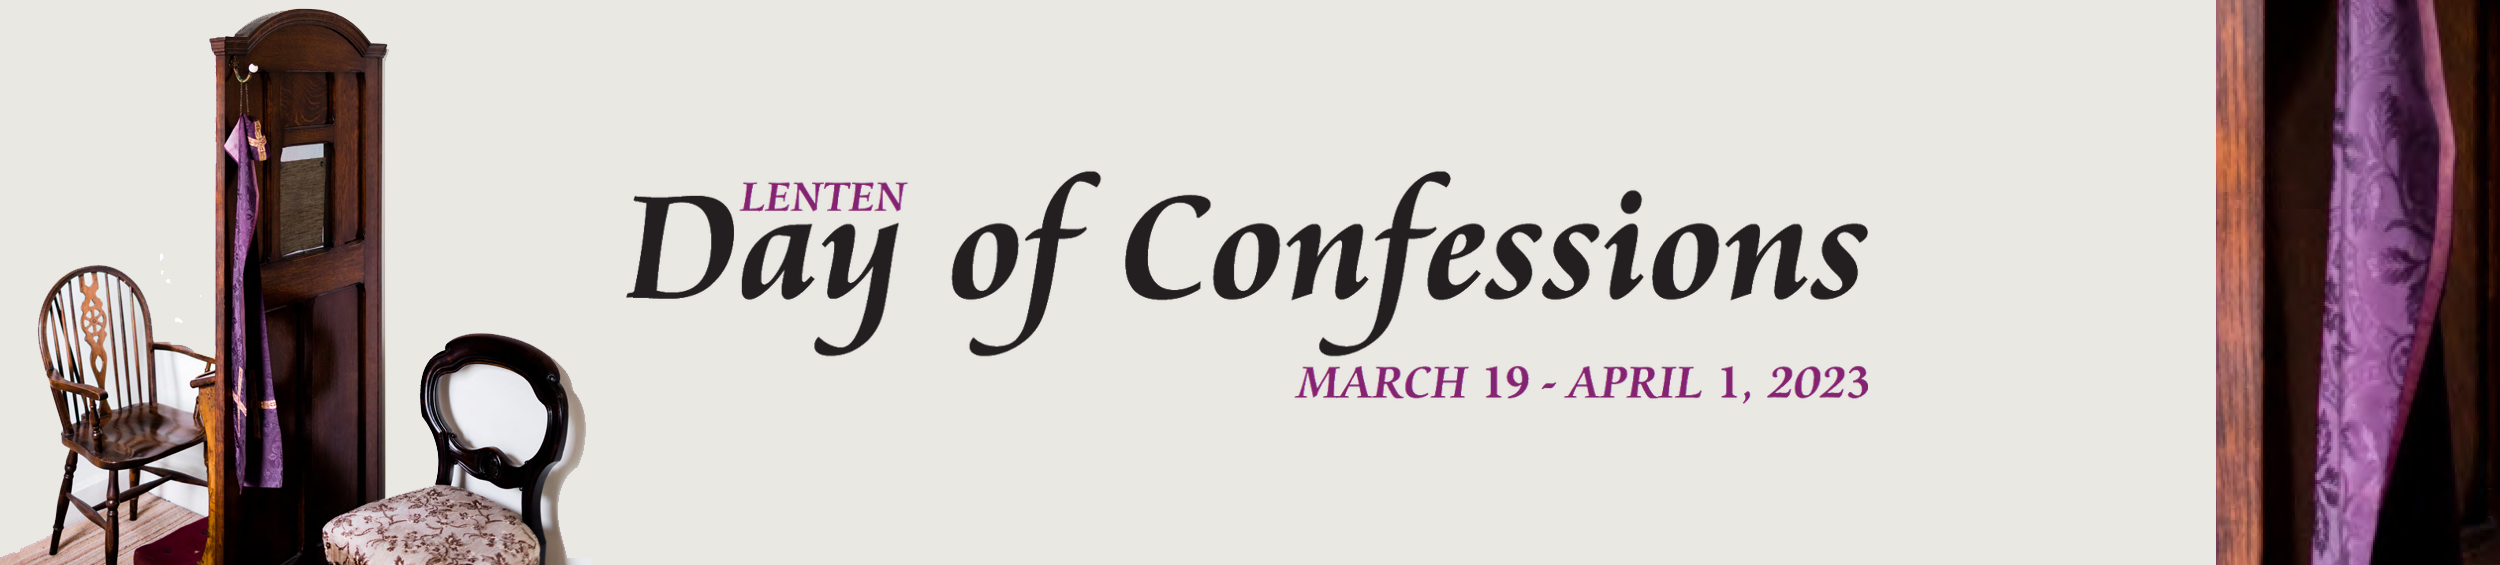 Lenten Day of Confessions